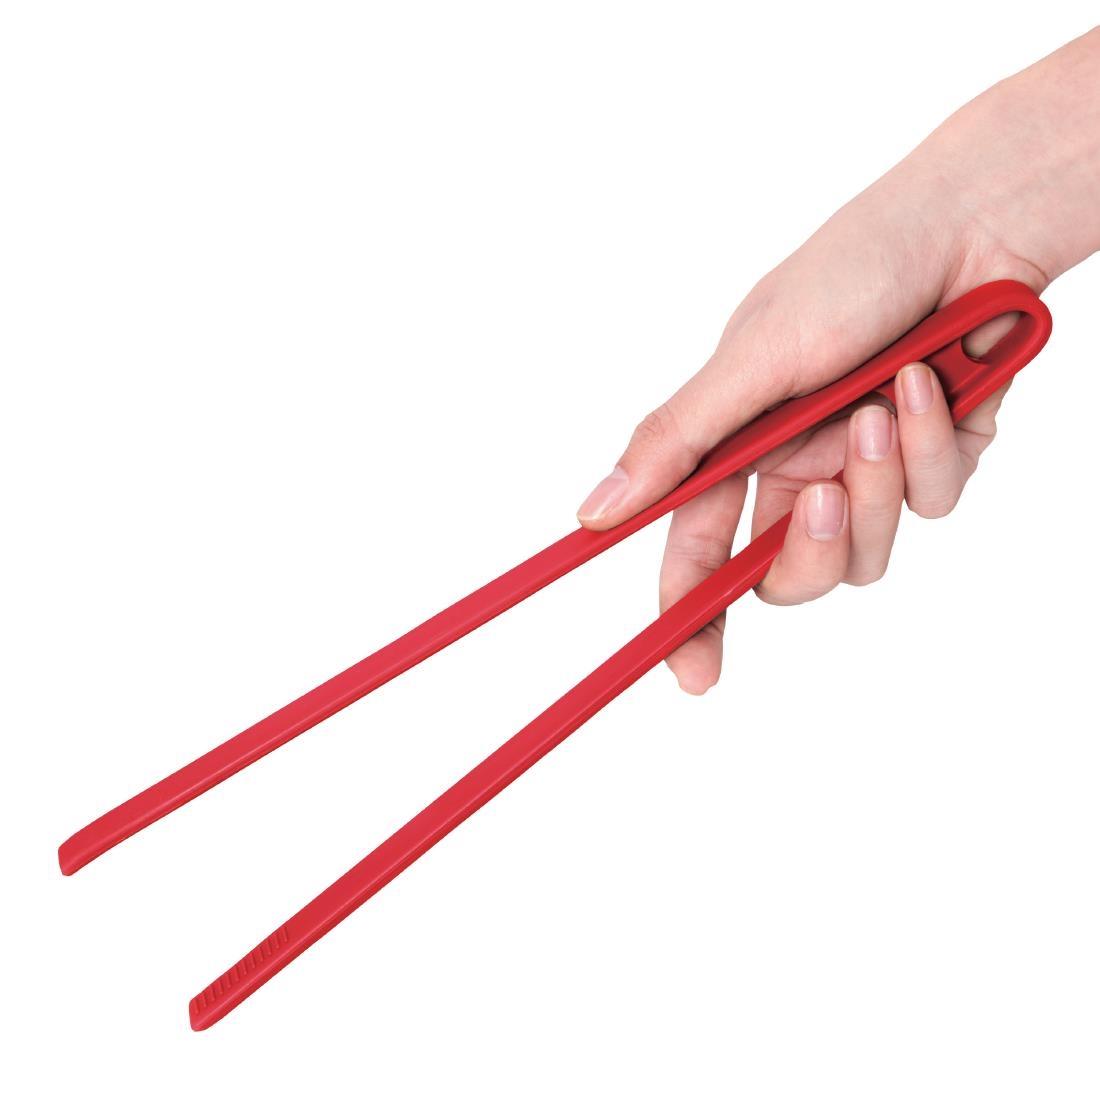 Vogue Silicone Tweezer Tongs Red 11" - GL353  - 2